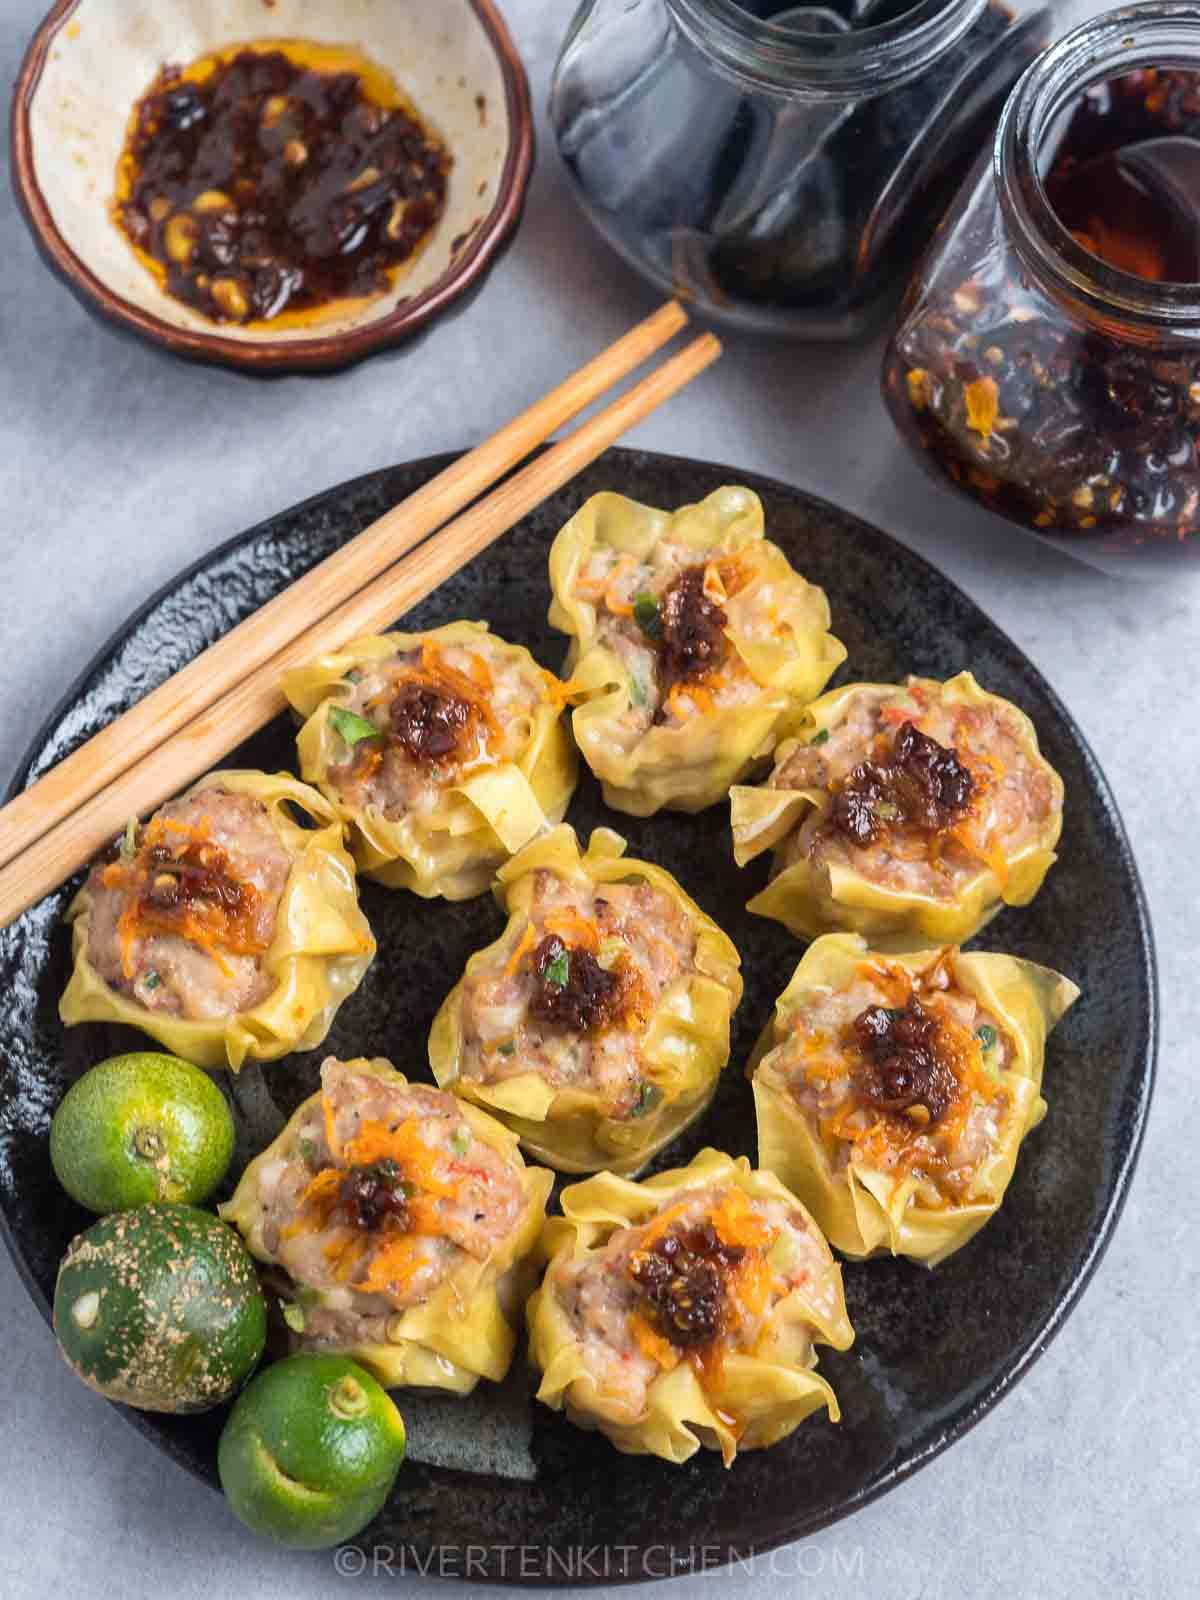 Siomai with Chili Oil Soy Sauce